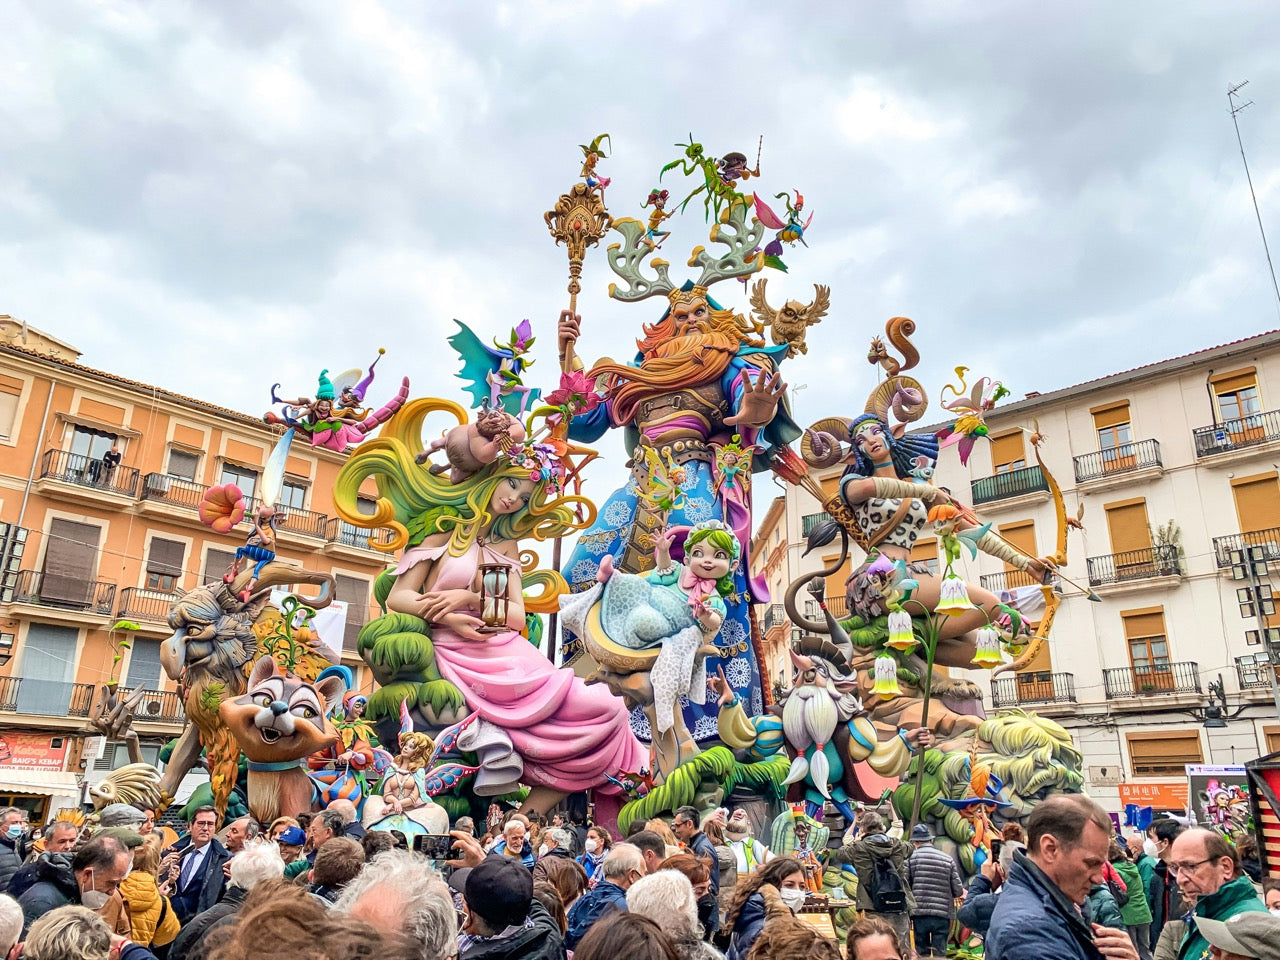 CULTURE: Las Fallas in Valencia, Spain - Everything you need to know